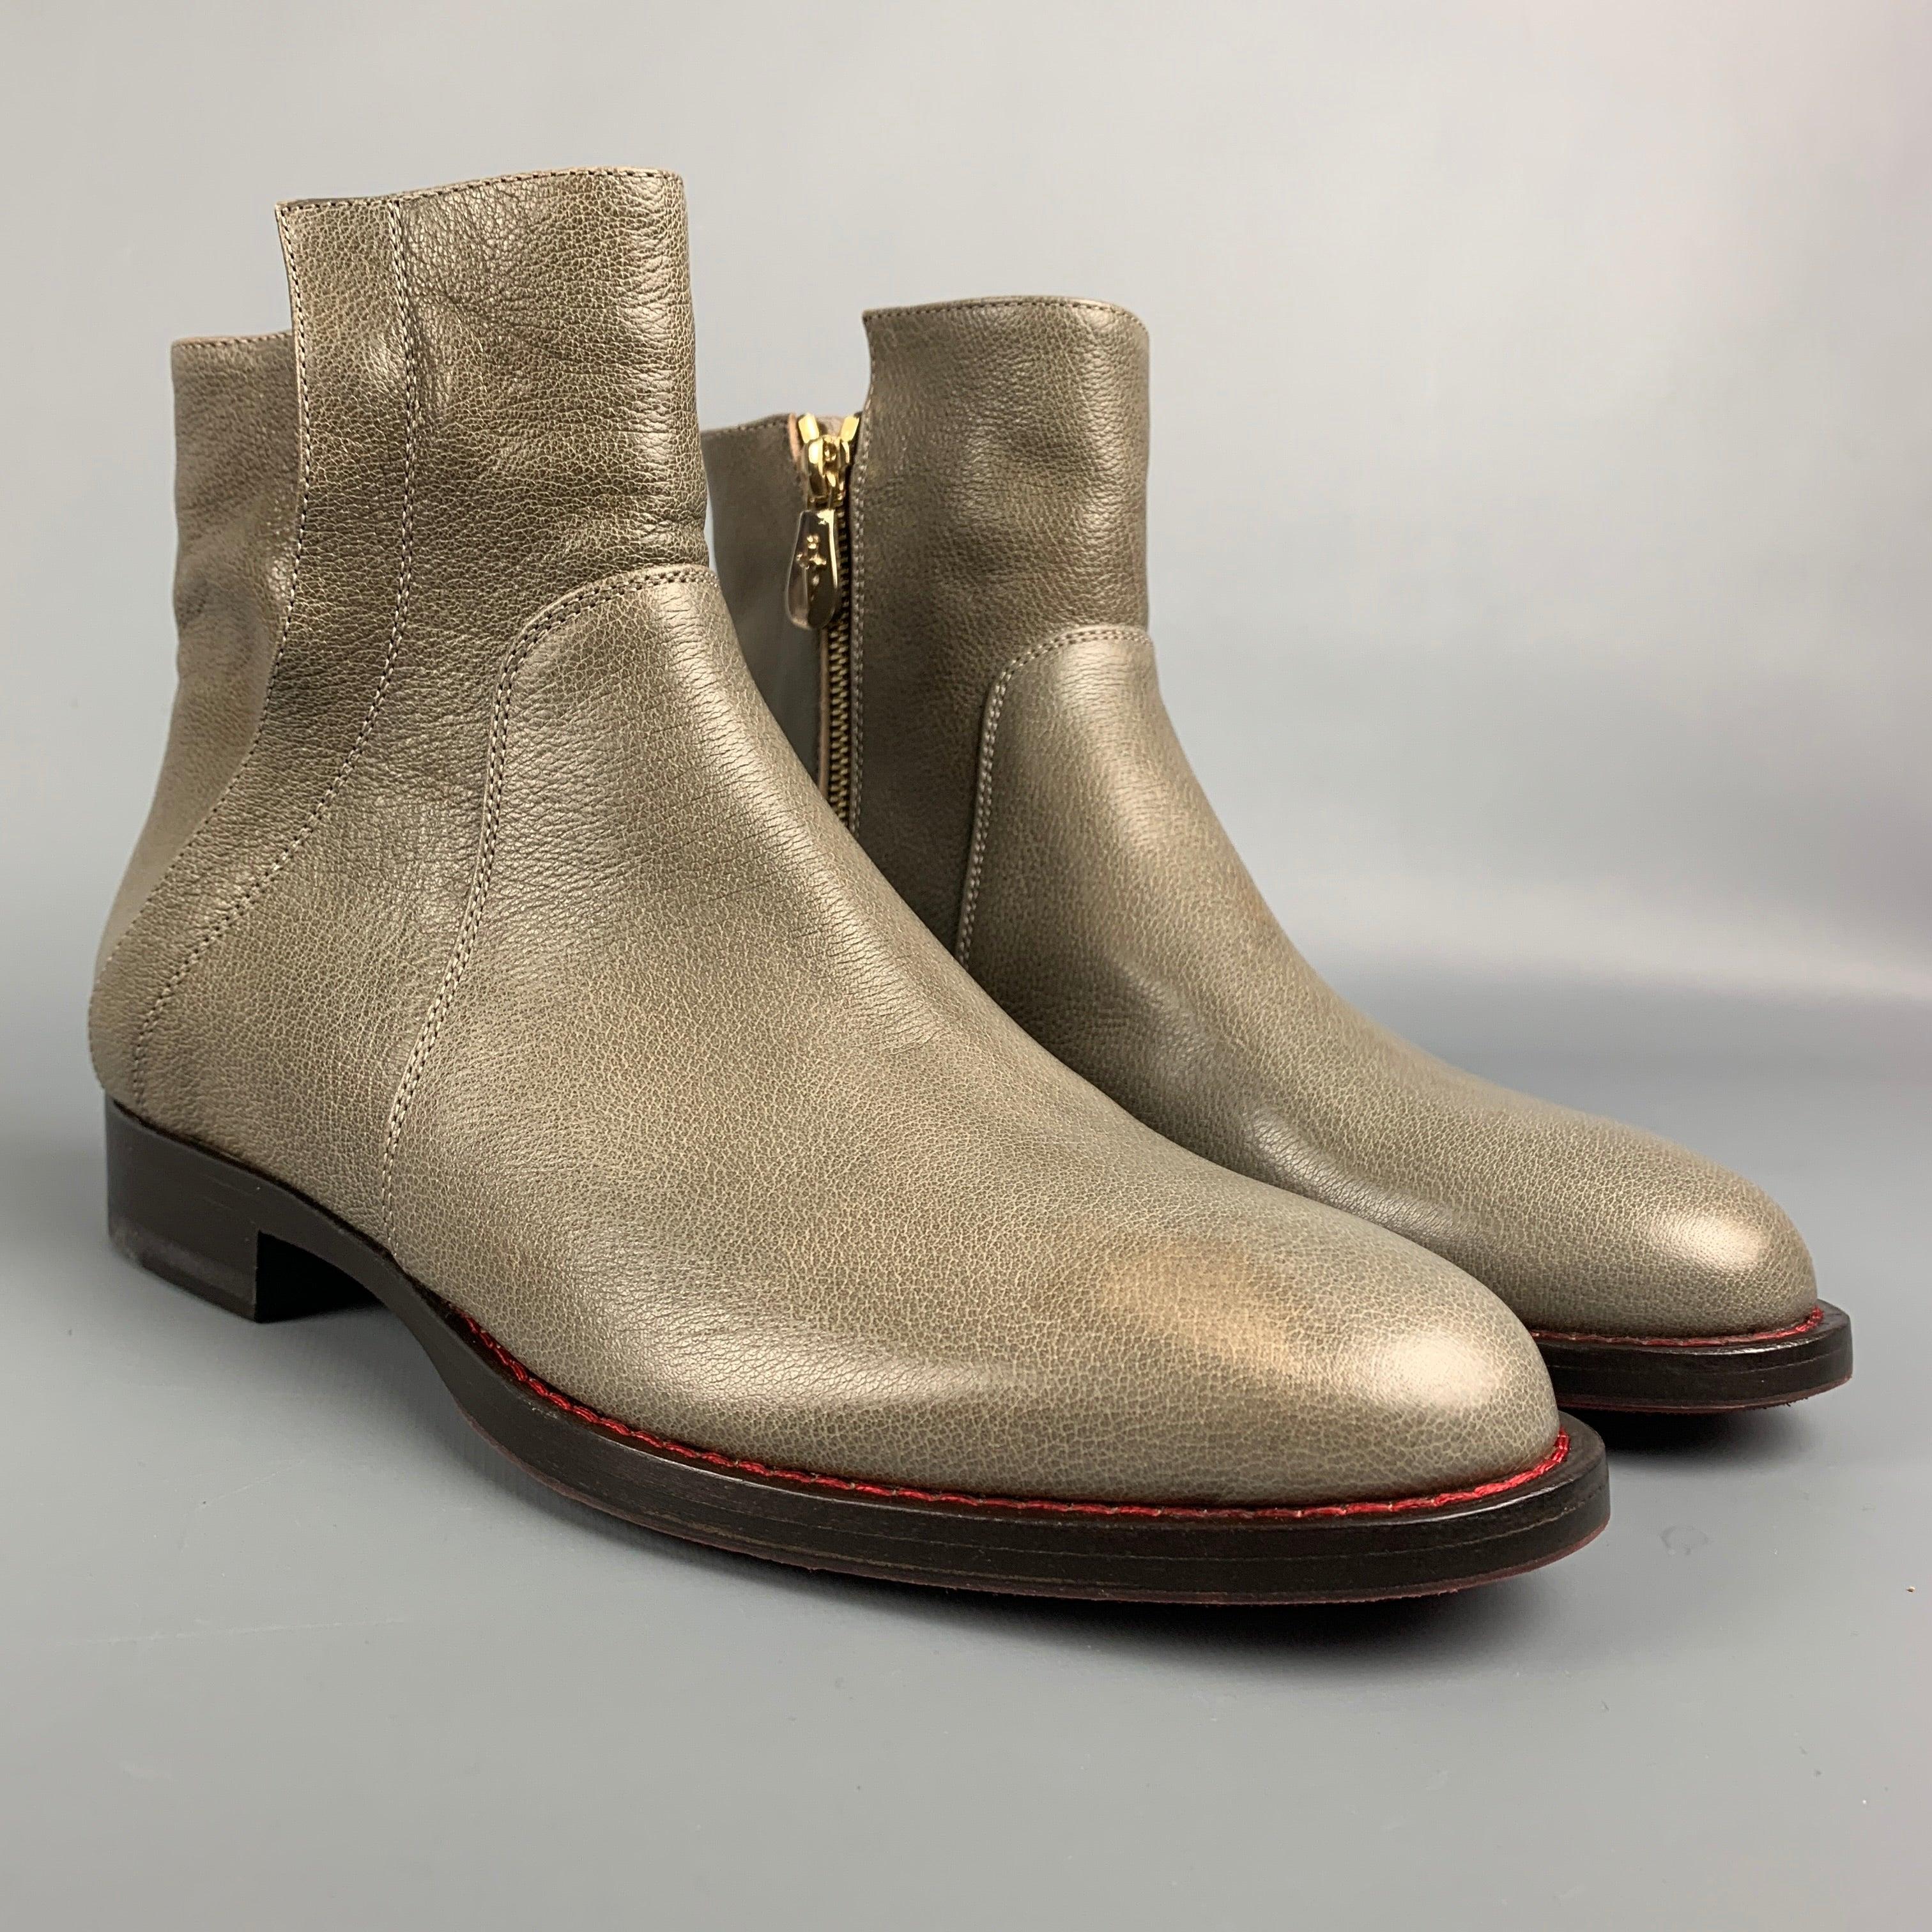 CESARE PACIOTTI ankle boots comes in a taupe pebble grain leather featuring red interior, rubber sole, and a double zipper closure. Made in Italy.
New With Box.
 

Marked:   38.5 

Measurements: 
  Length:
10.5 inches  Width: 3.5 inches  Height: 5